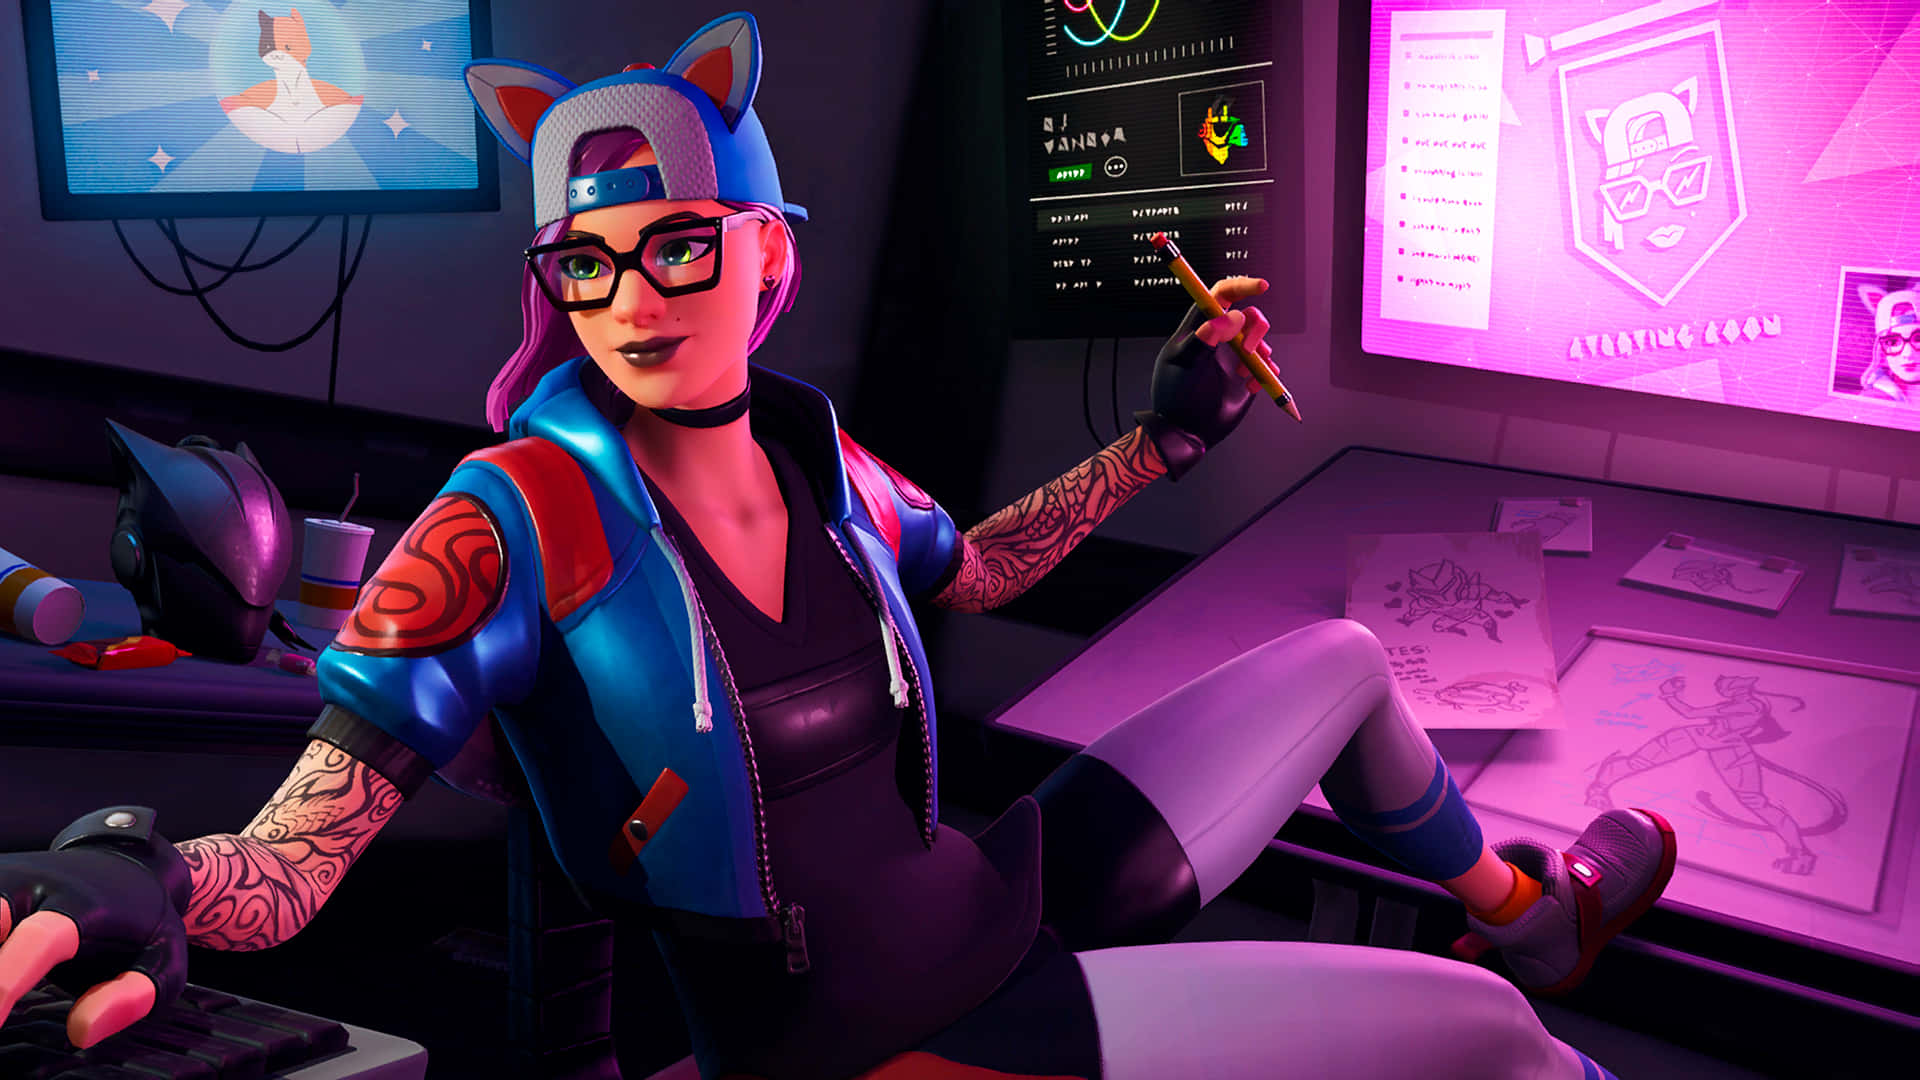 Join the Lynx Squad and rule the world of Fortnite. Wallpaper